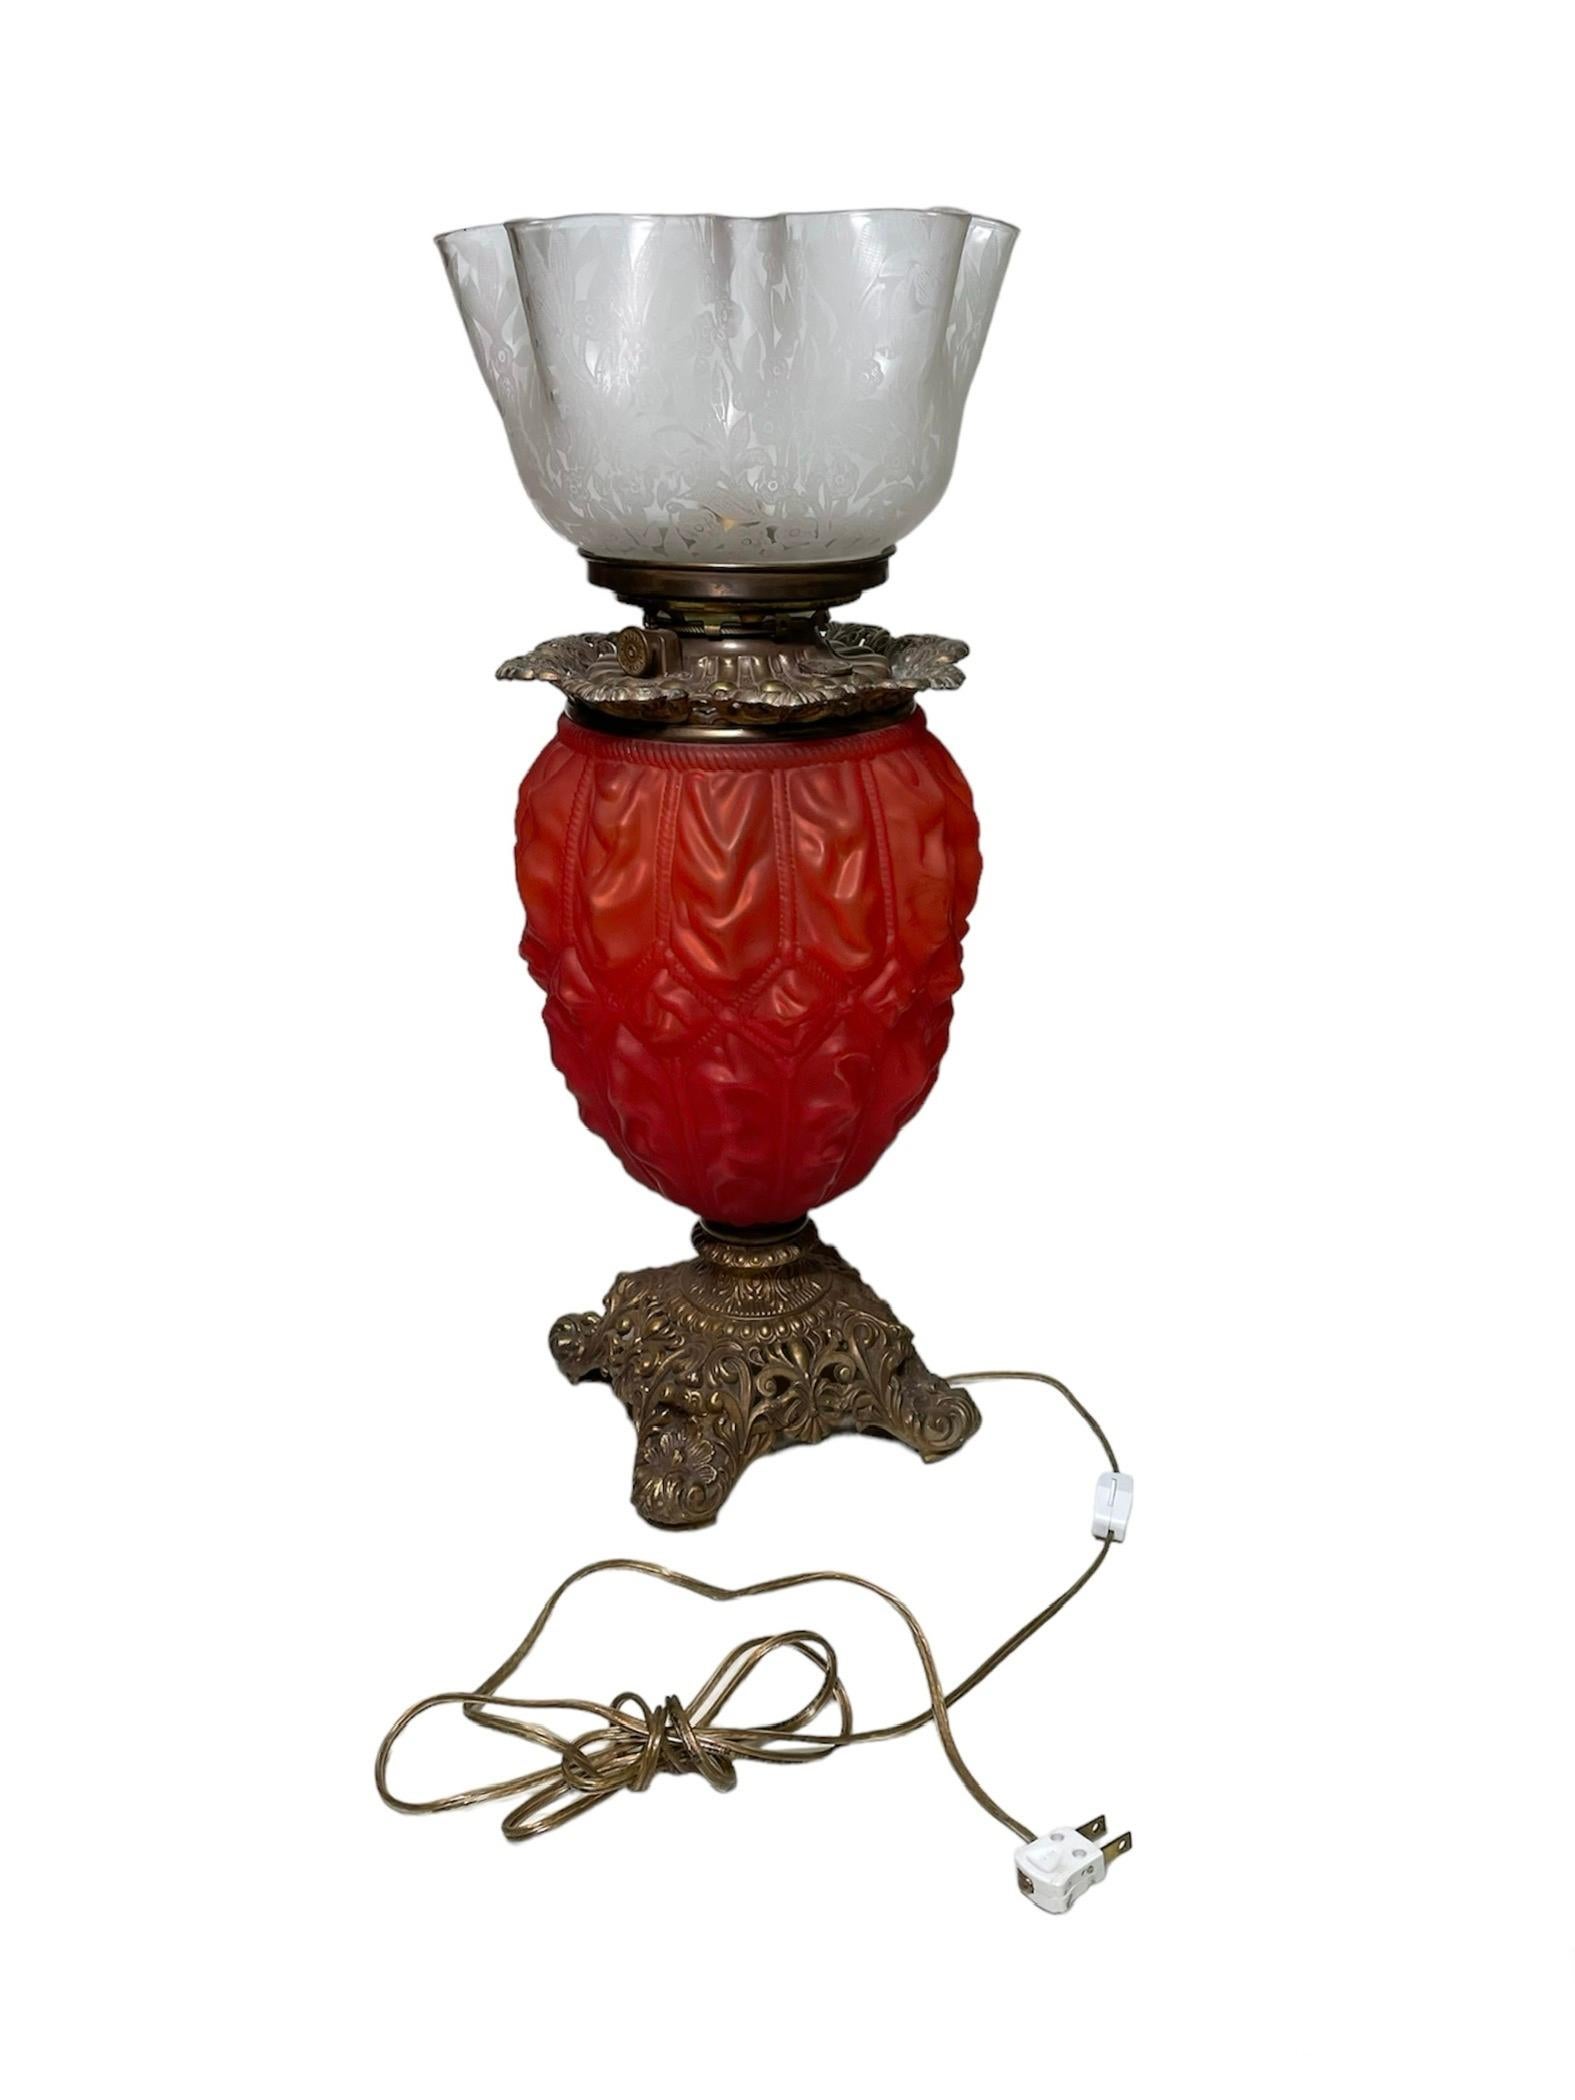 This is a Victorian Brass and Glass table lamp. It depicts a lamp with a large stained red glass bulbous creased body decorated with ropes and supported by a brass square shaped base with four feet. The base is adorned with a repousse of Fleur de